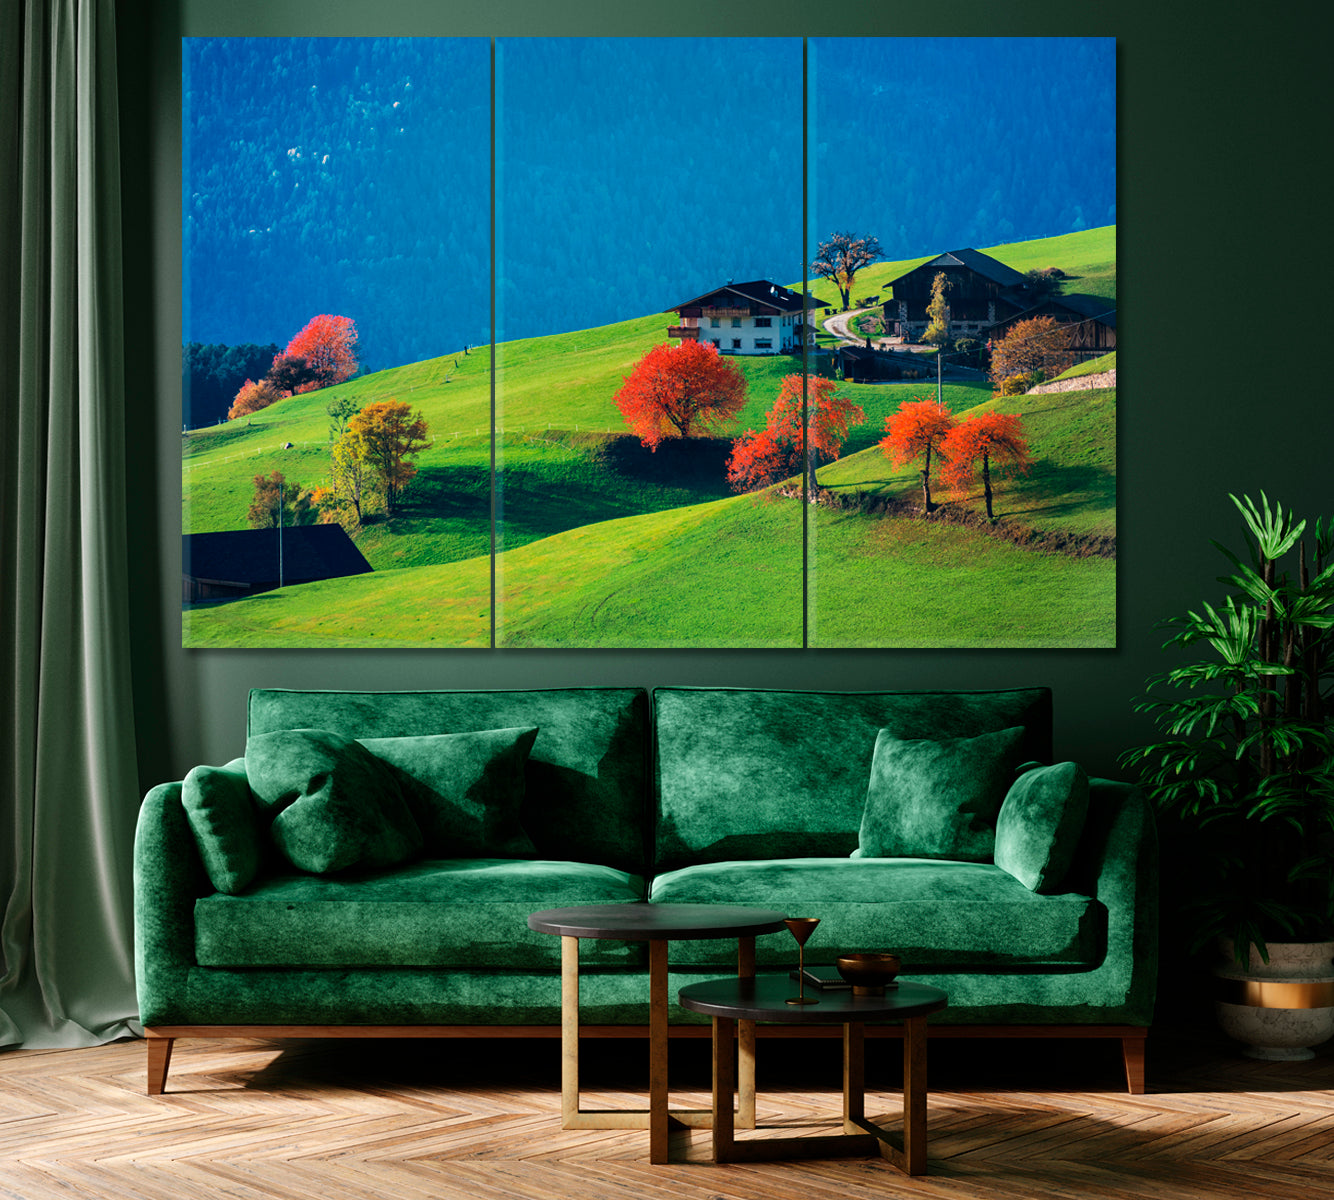 Village in Dolomites North Italy Canvas Print ArtLexy 3 Panels 36"x24" inches 